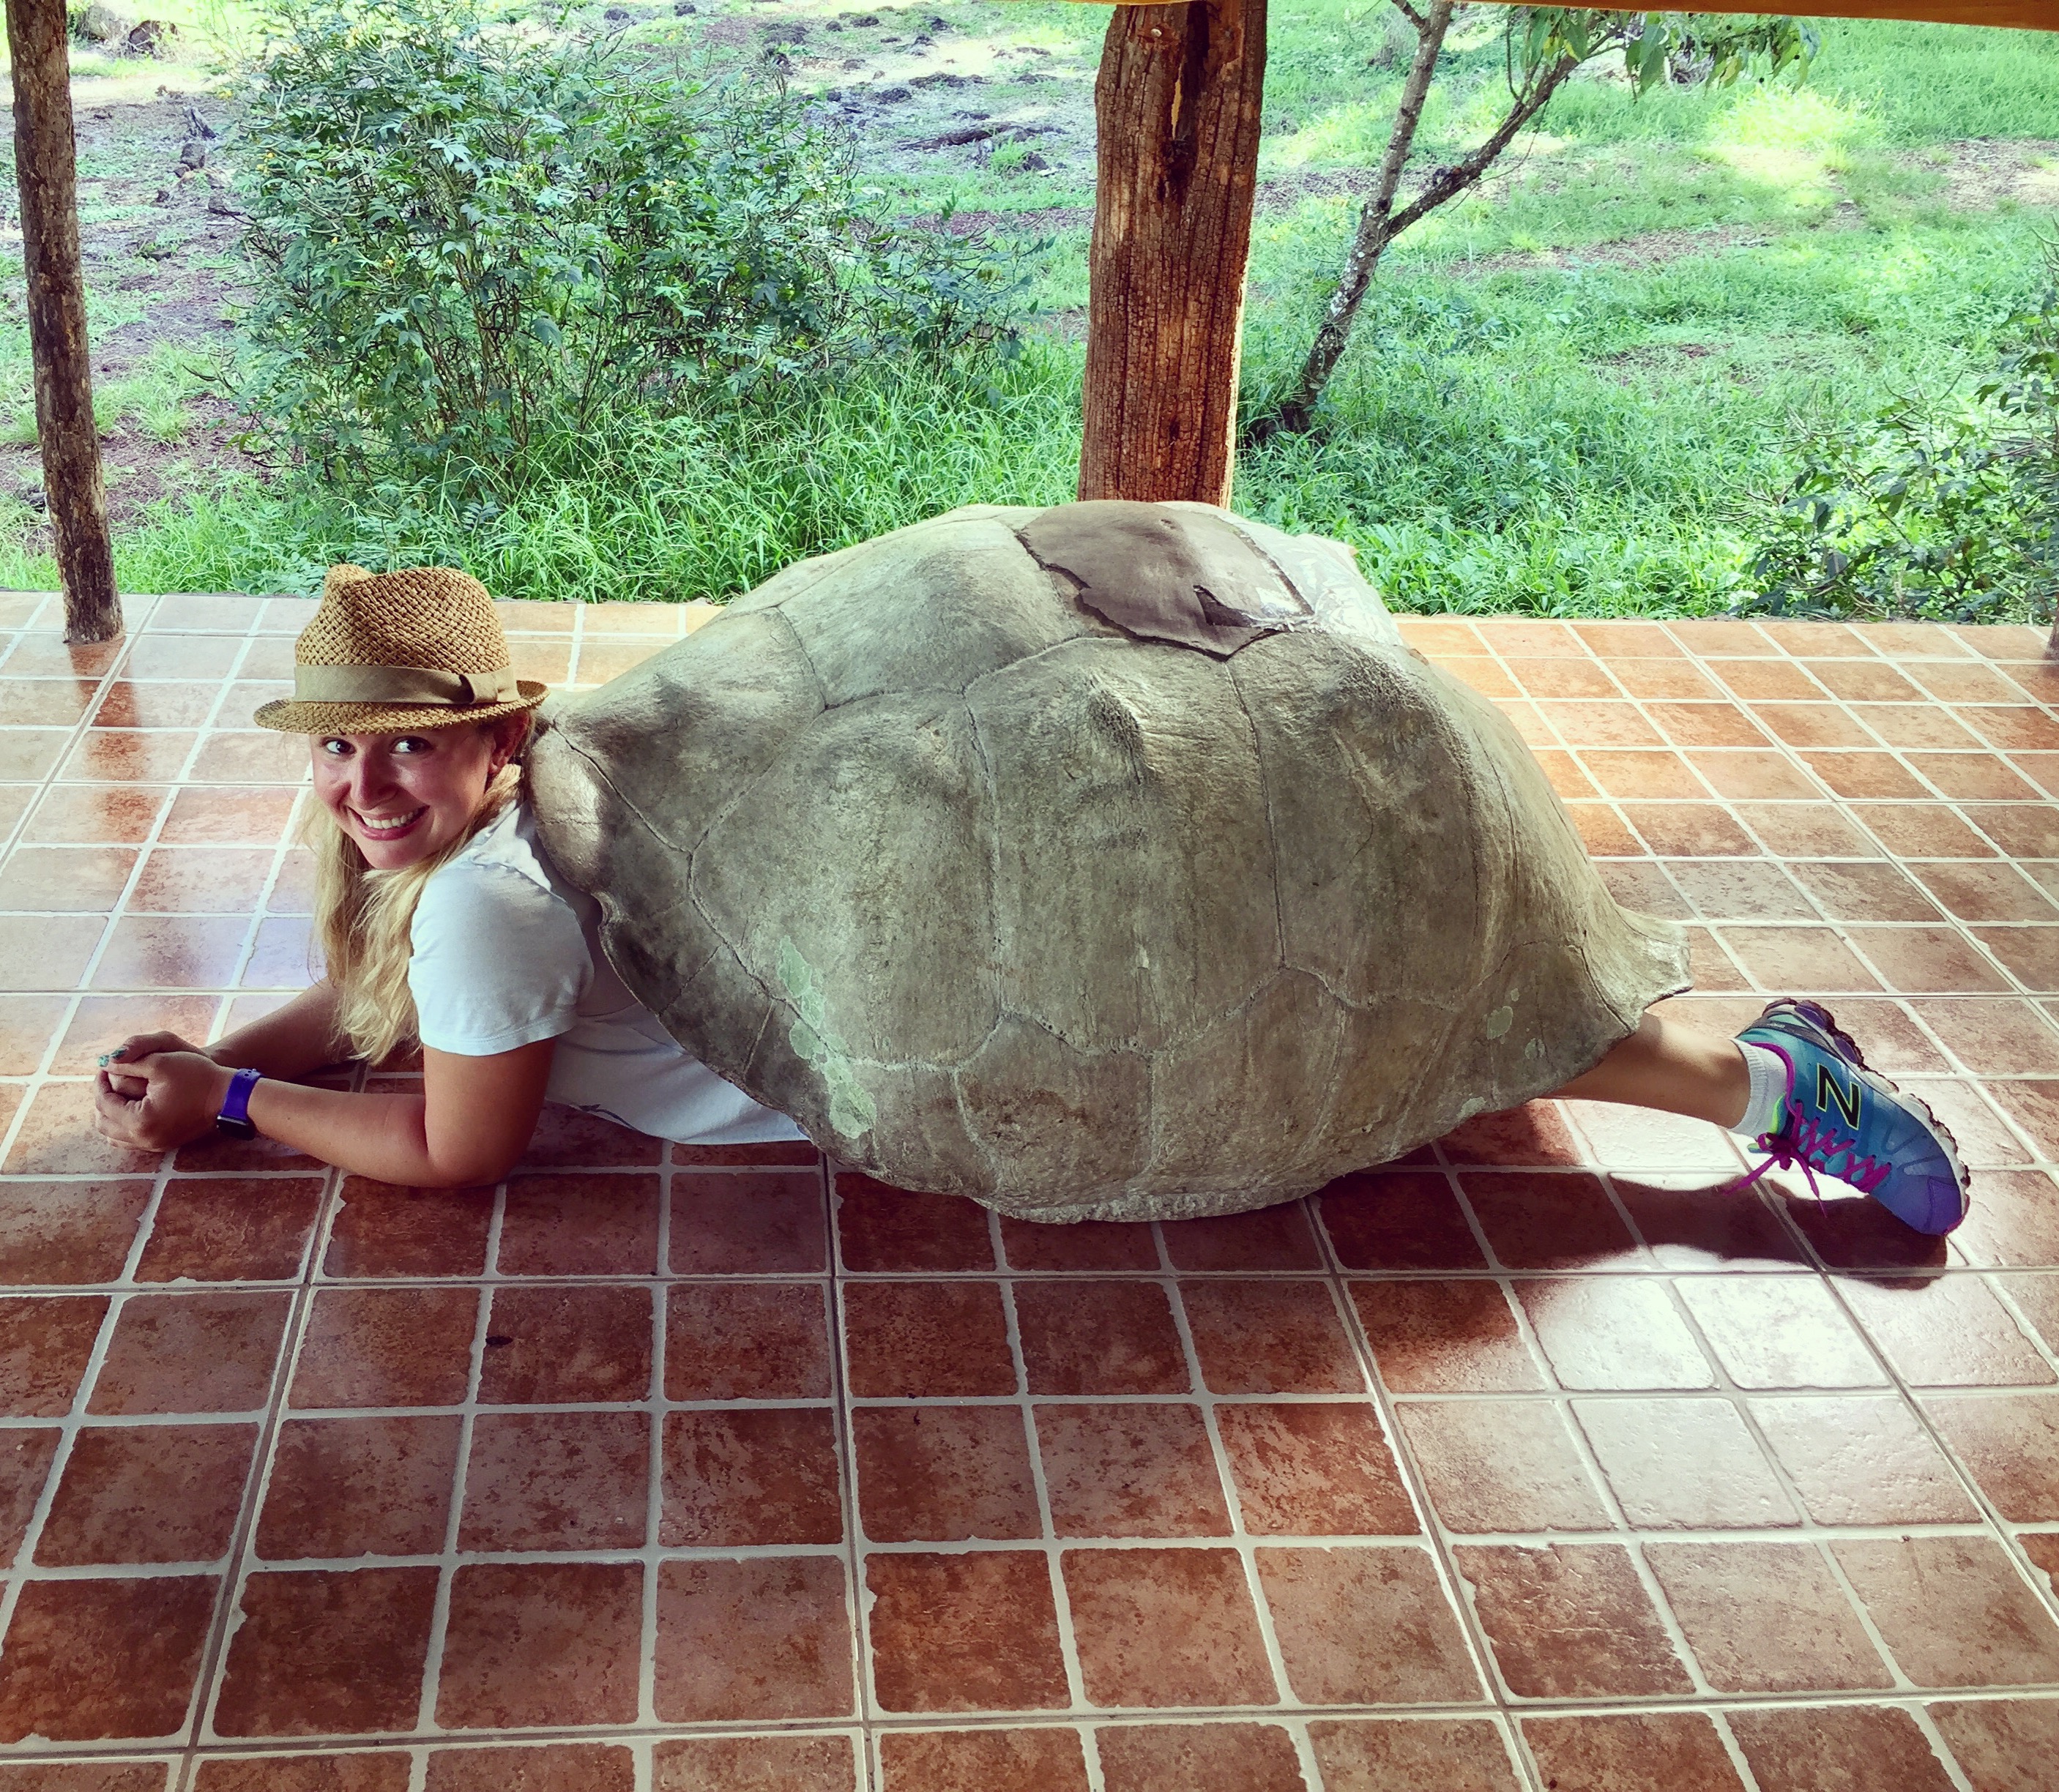 Bucket list complete. Visiting the Giant Tortoises in the Galapagos Islands